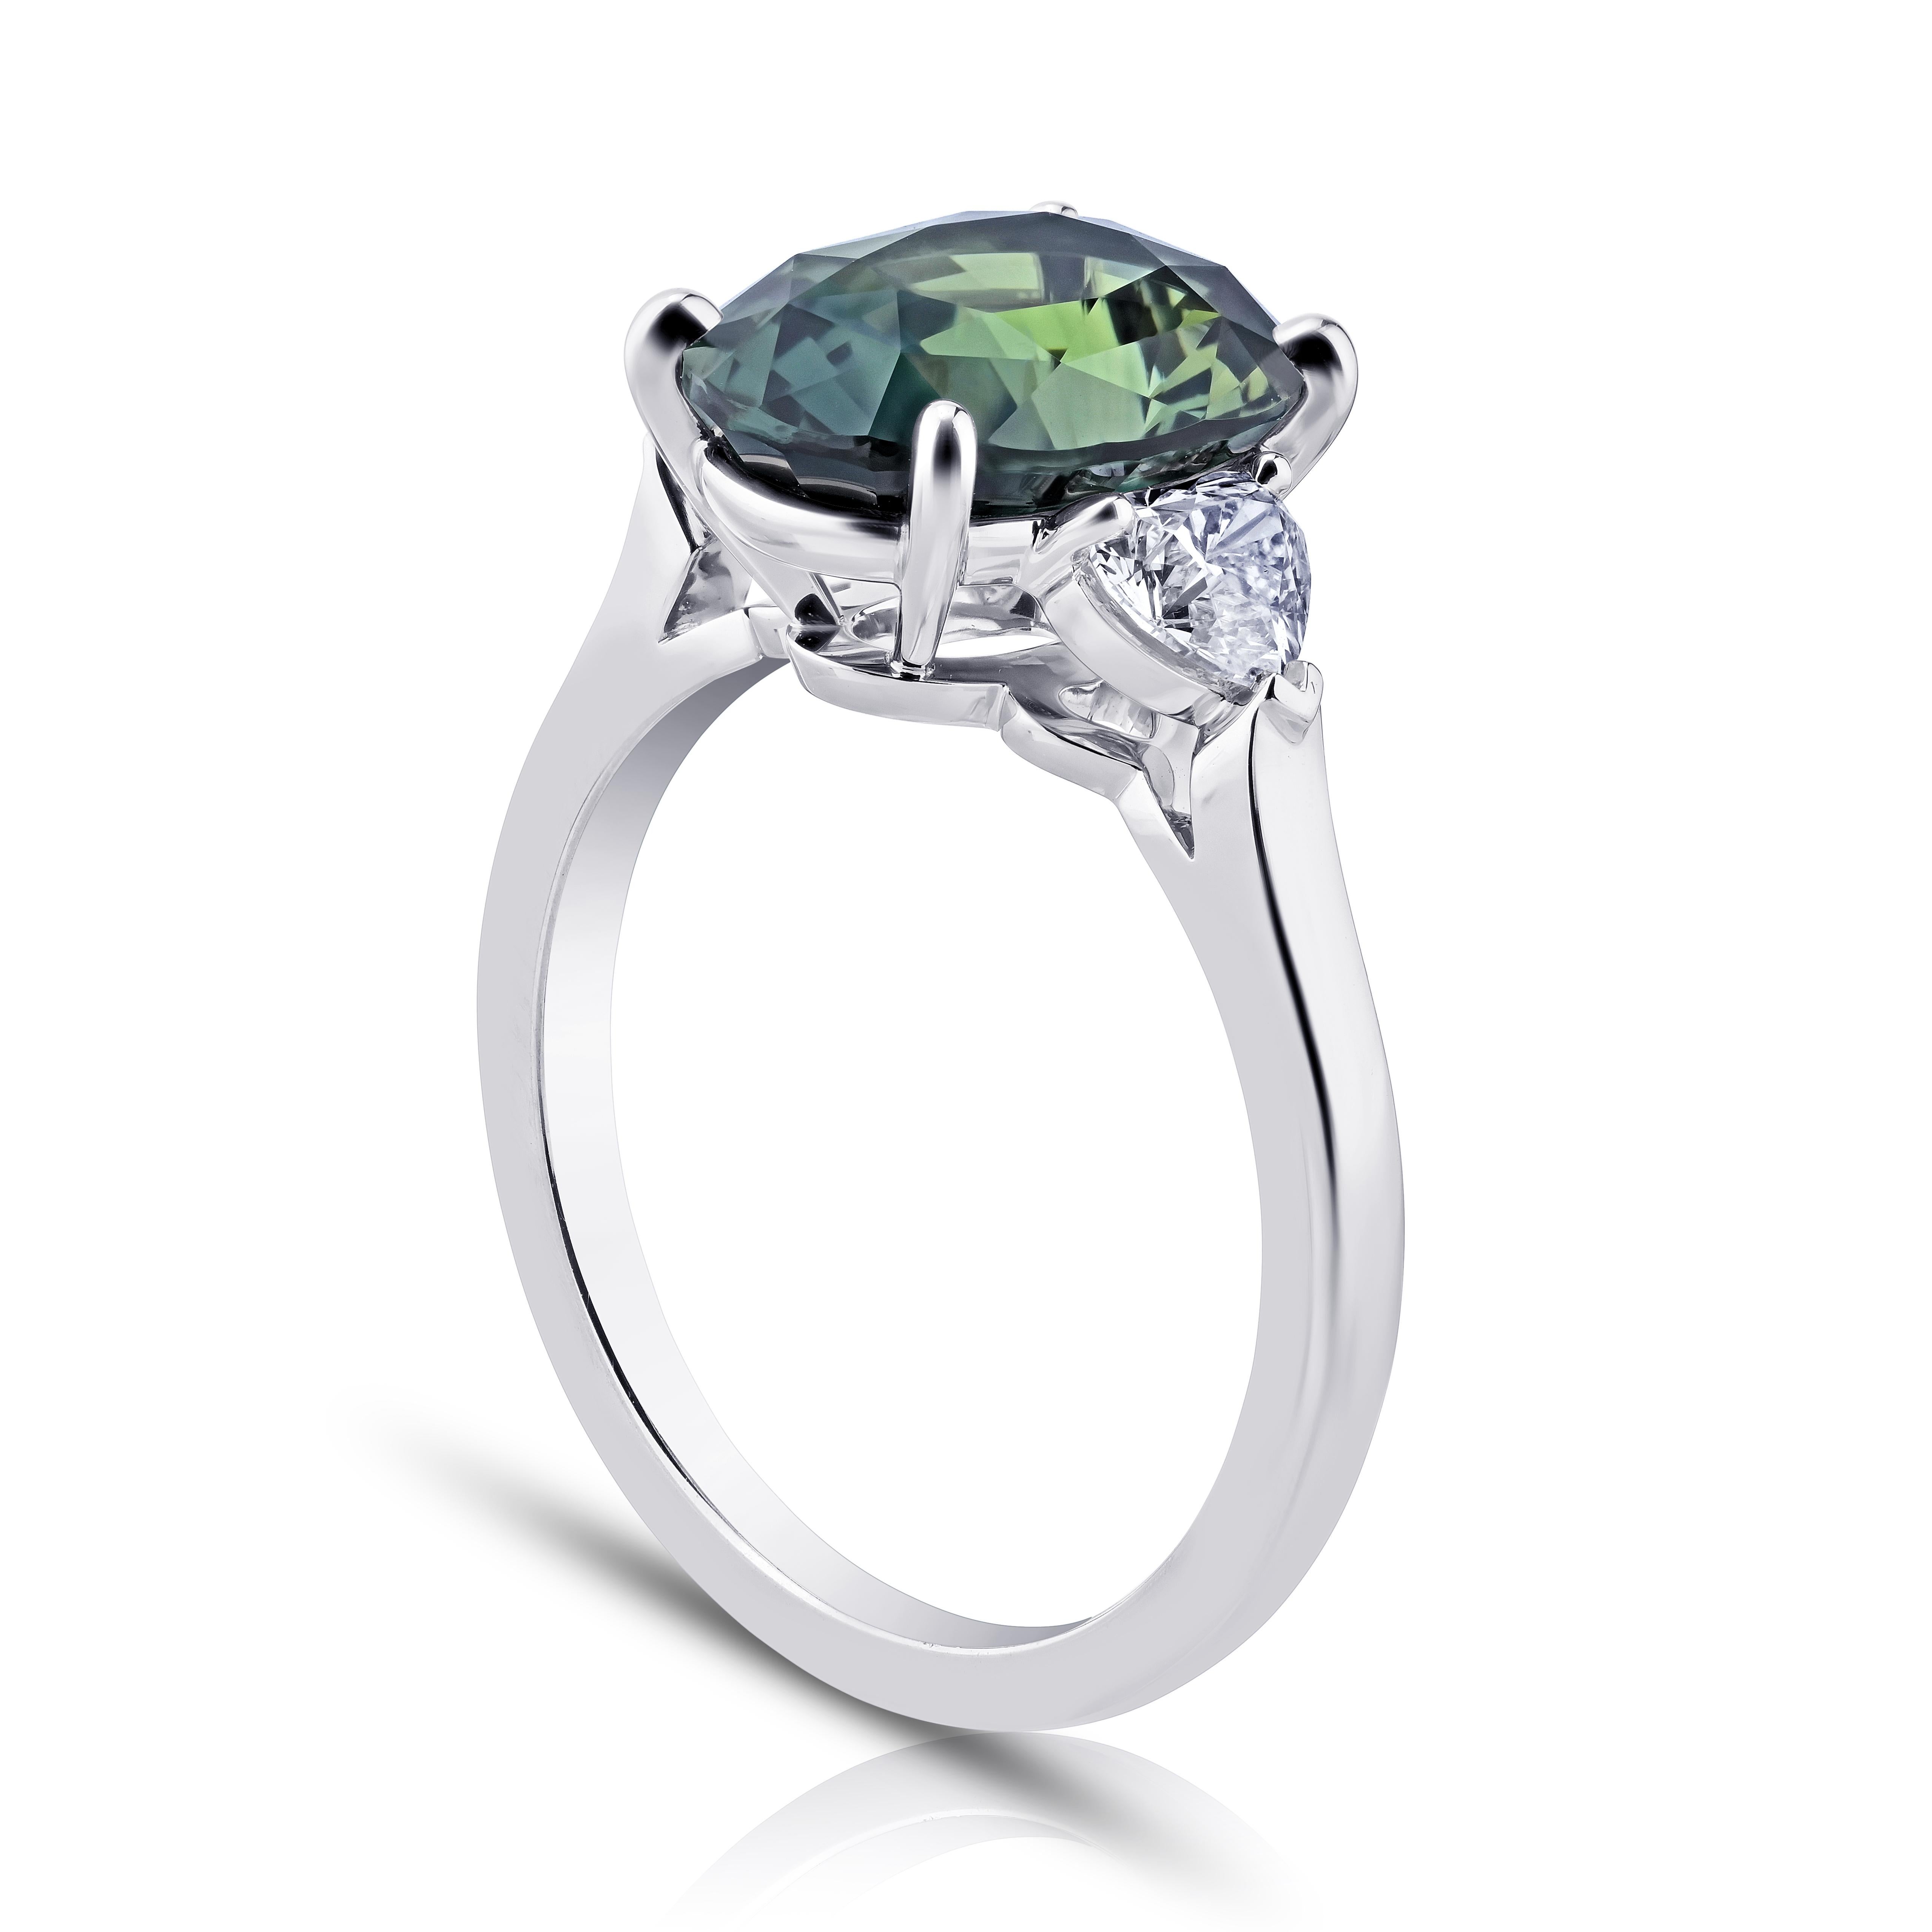 5.17 carat Oval Green  Sapphire with Heart Modified Brilliant Diamonds .63 carats set in a Platinum ring